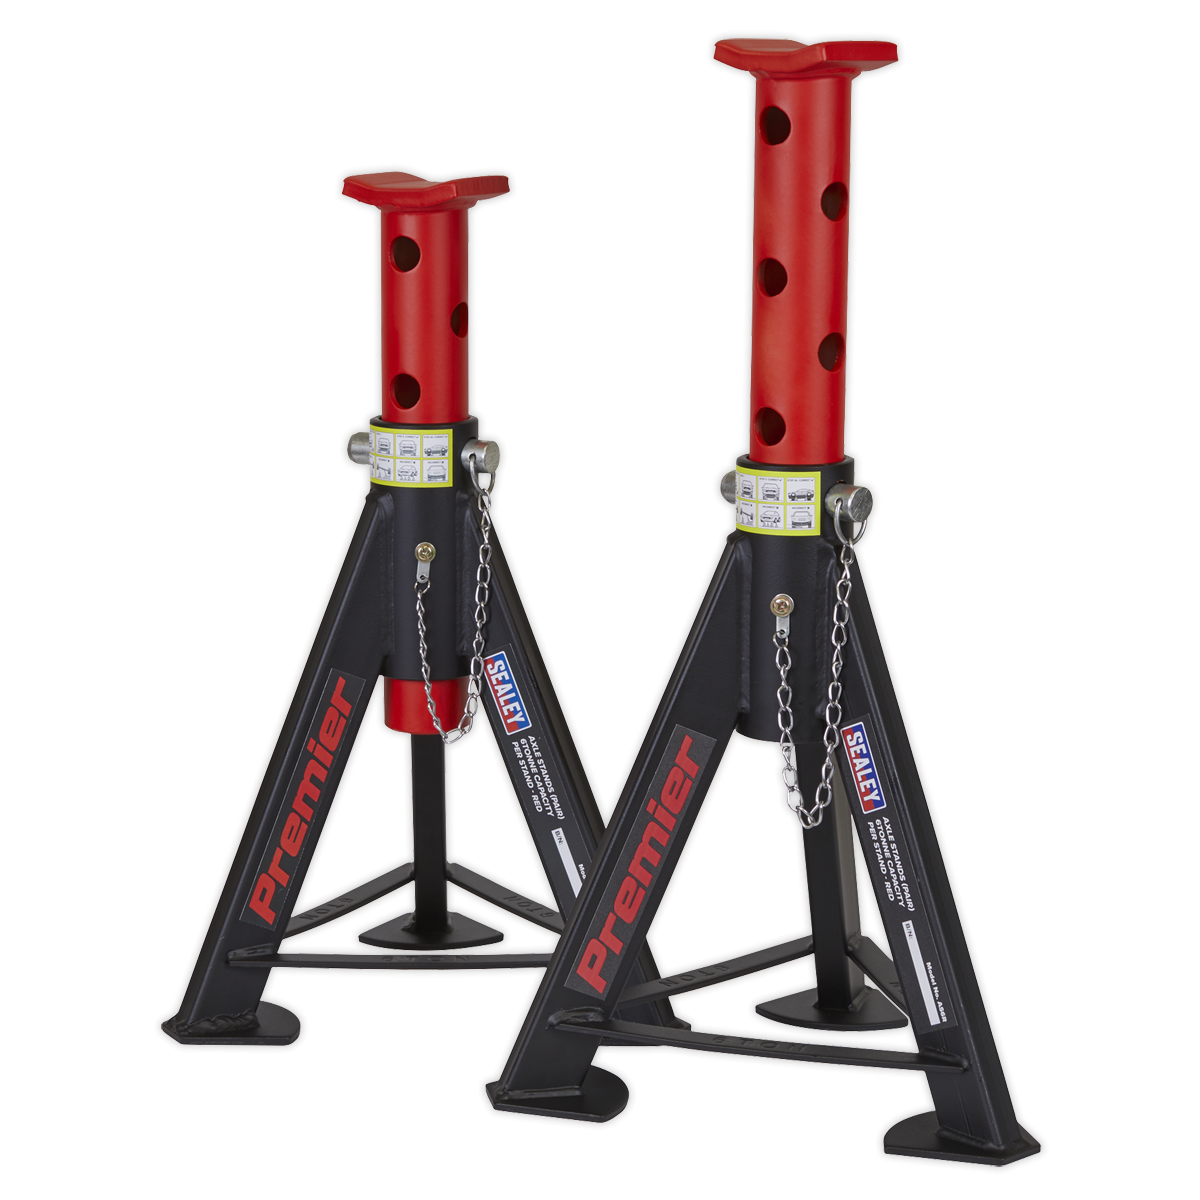 Sealey AS6R Axle Stands (Pair) 6tonne Capacity per Stand - Red